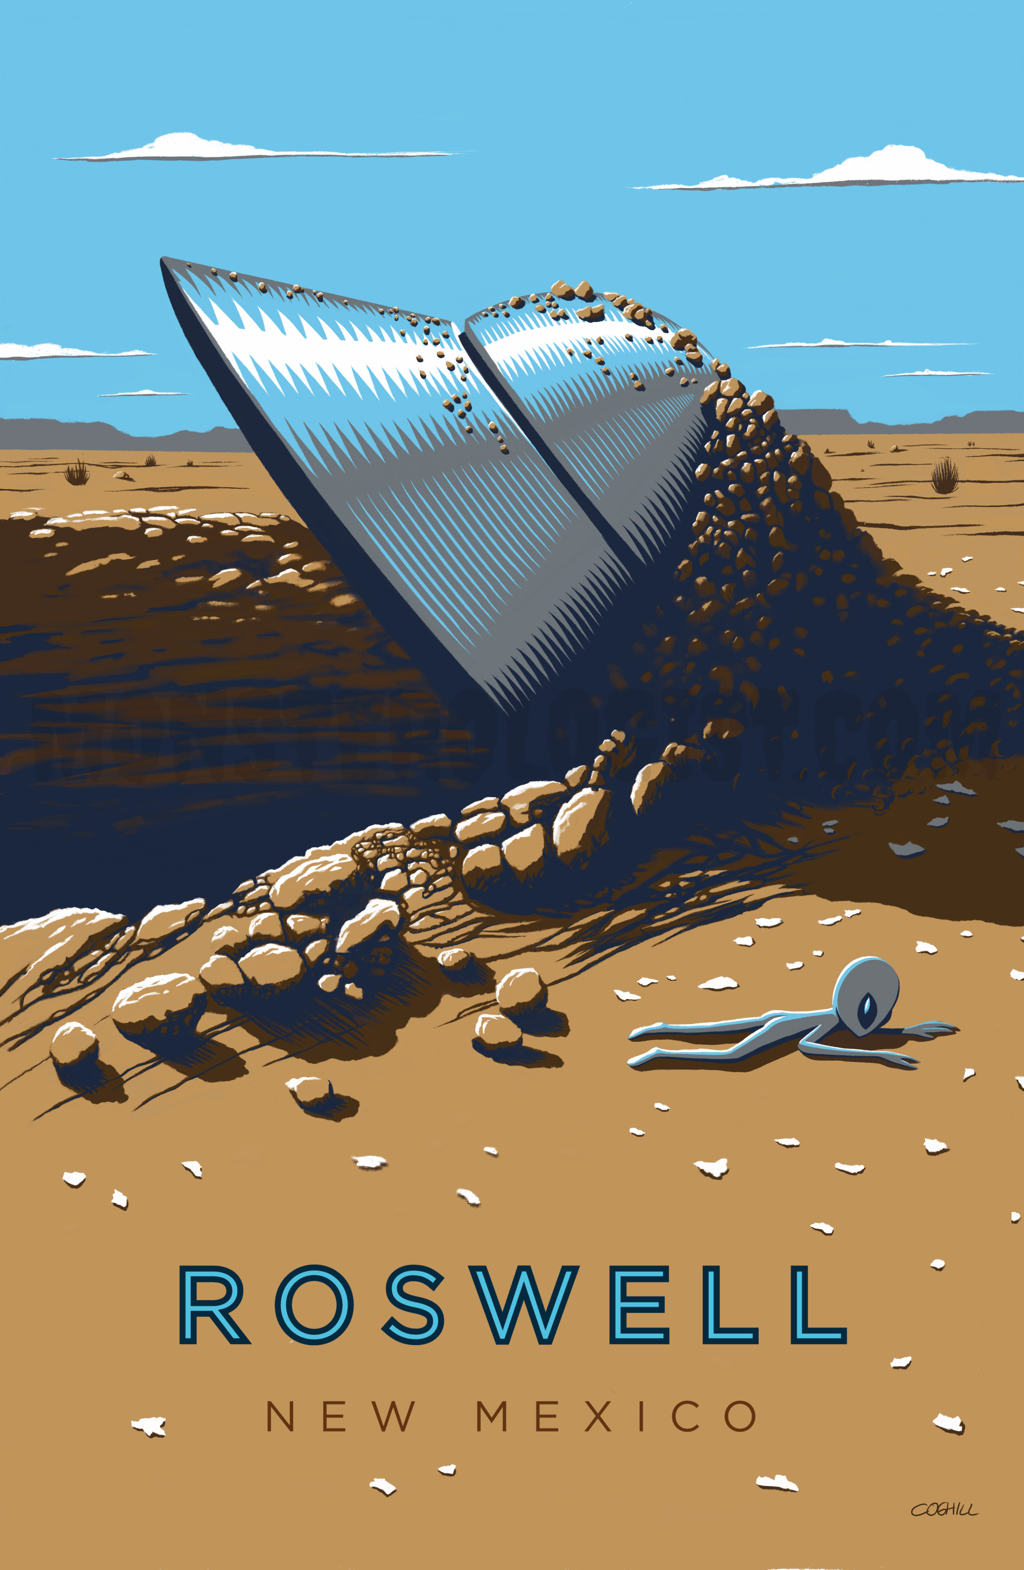 Roswell, New Mexico UFO crash vintage travel poster by Monsterologist. 